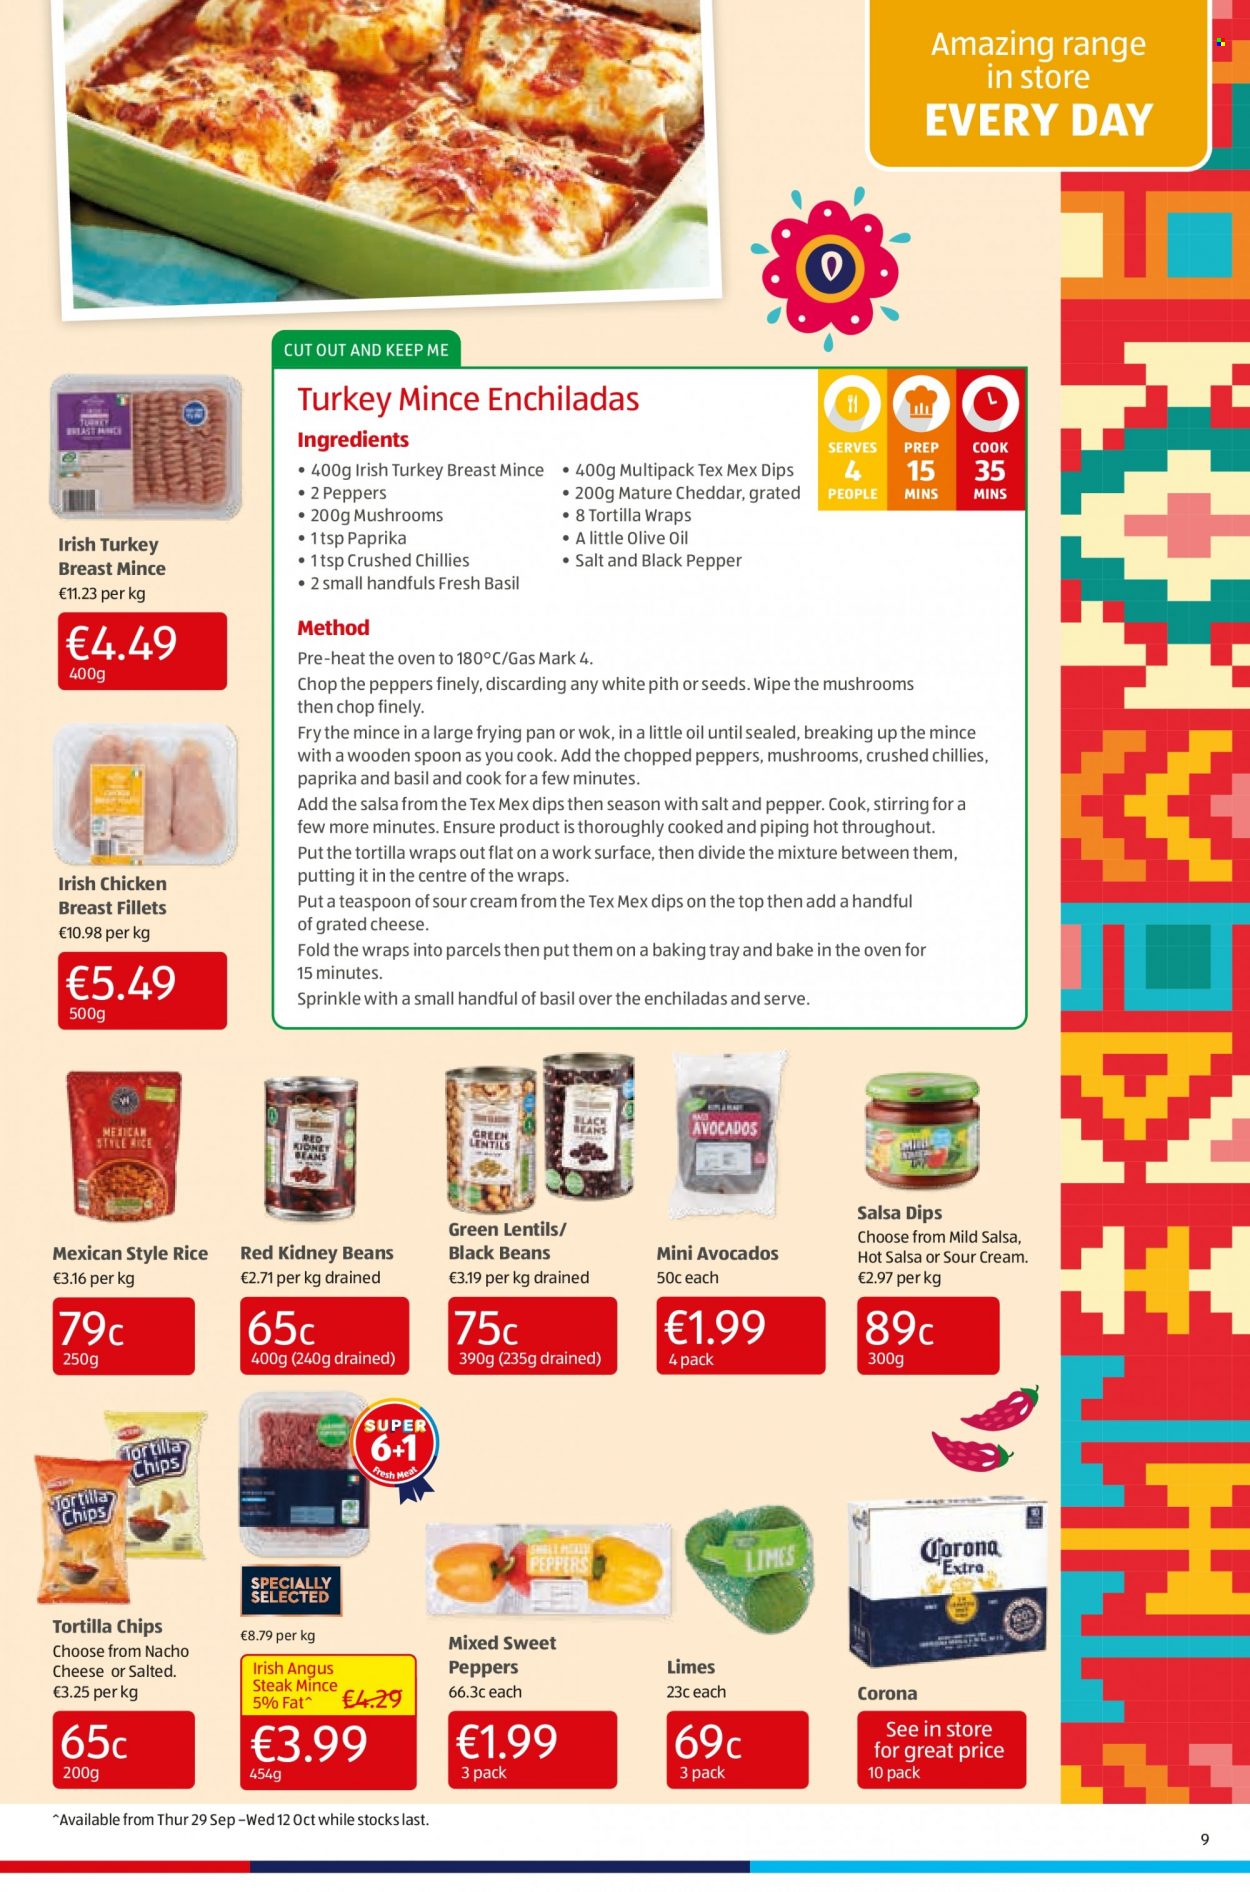 thumbnail - Aldi offer  - 06.10.2022 - 12.10.2022 - Sales products - wraps, sweet peppers, avocado, limes, enchiladas, grated cheese, sour cream, tortilla chips, chips, black beans, lentils, kidney beans, rice, black pepper, salsa, olive oil, oil, beer, Corona Extra, ground turkey, turkey breast, chicken breasts, steak, spoon, pan, wok, baking tray, teaspoon. Page 9.